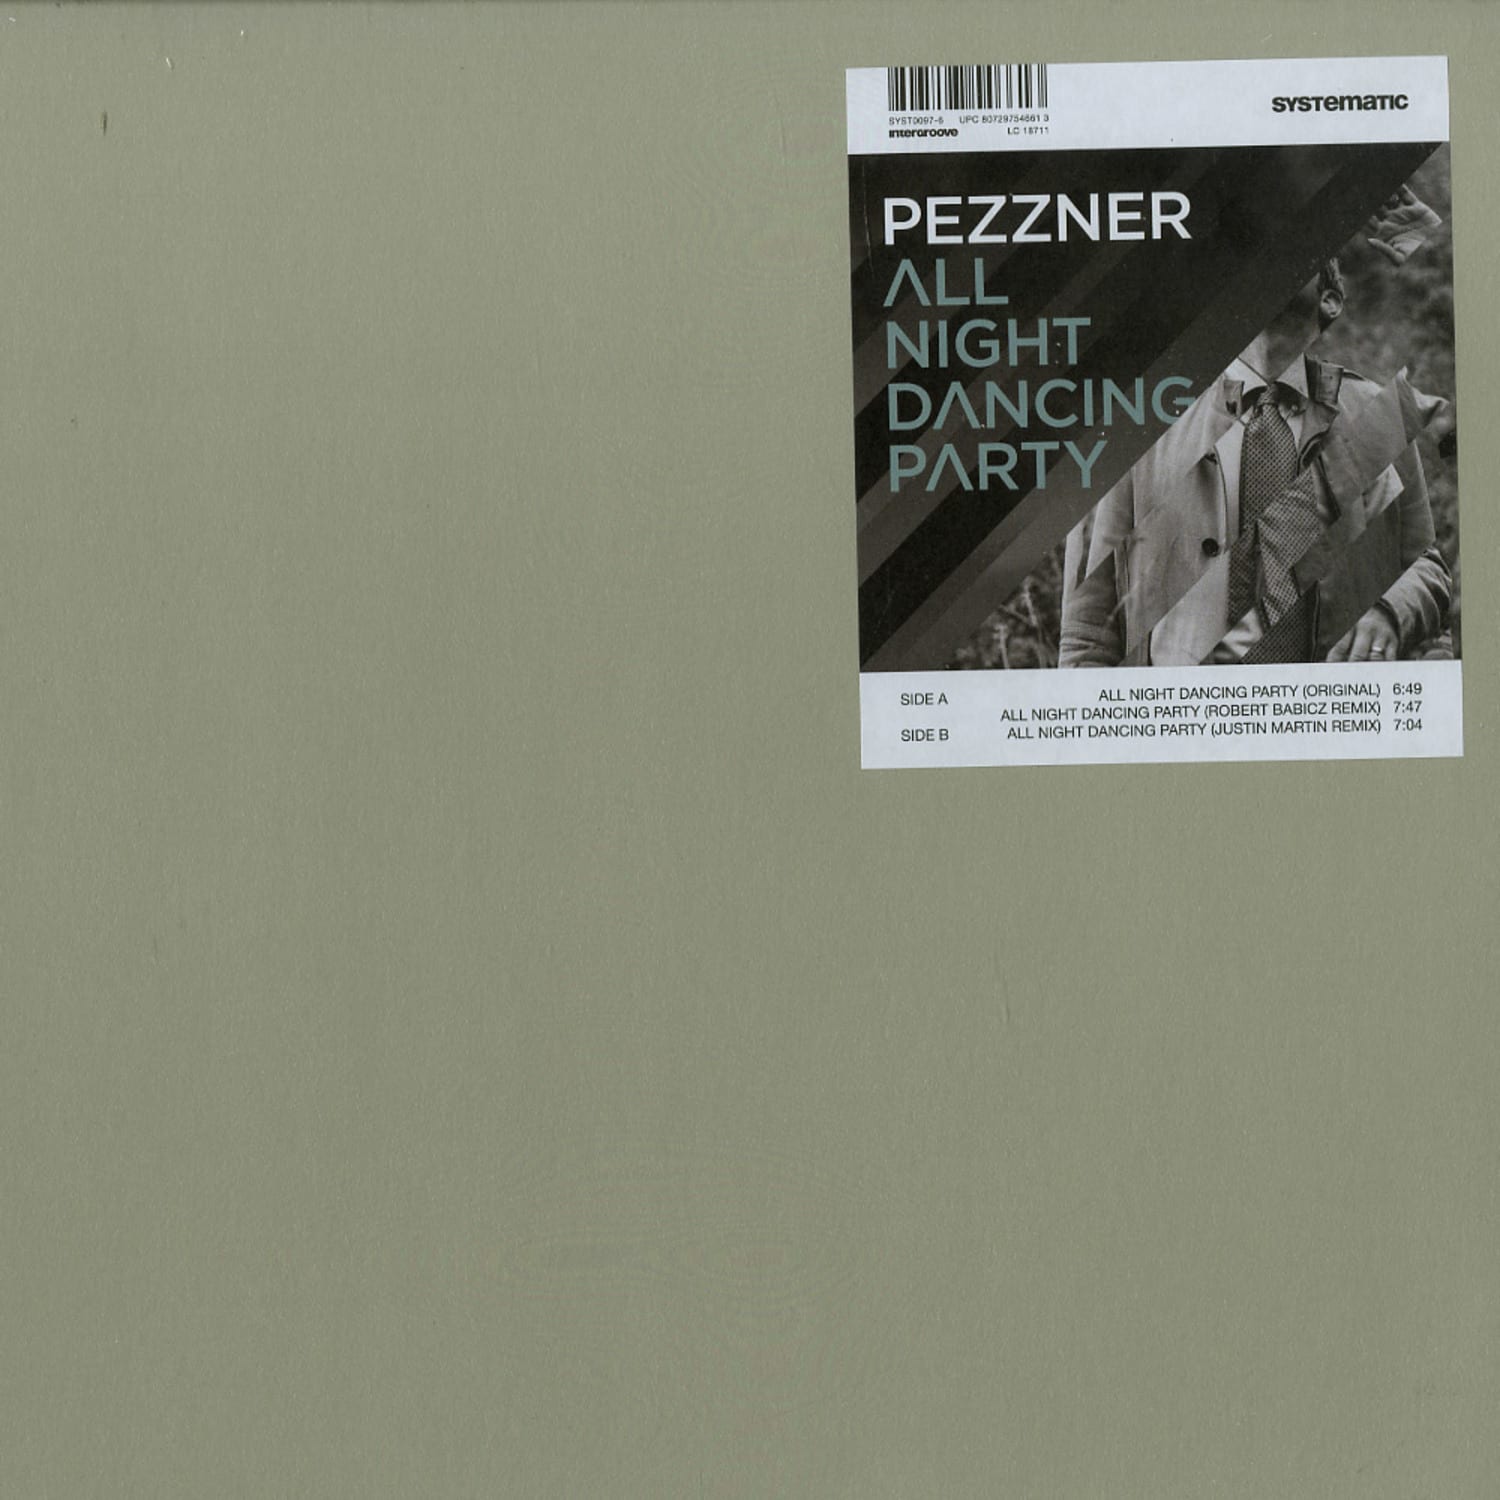 Pezzner - ALL NIGHT DANCING PARTY